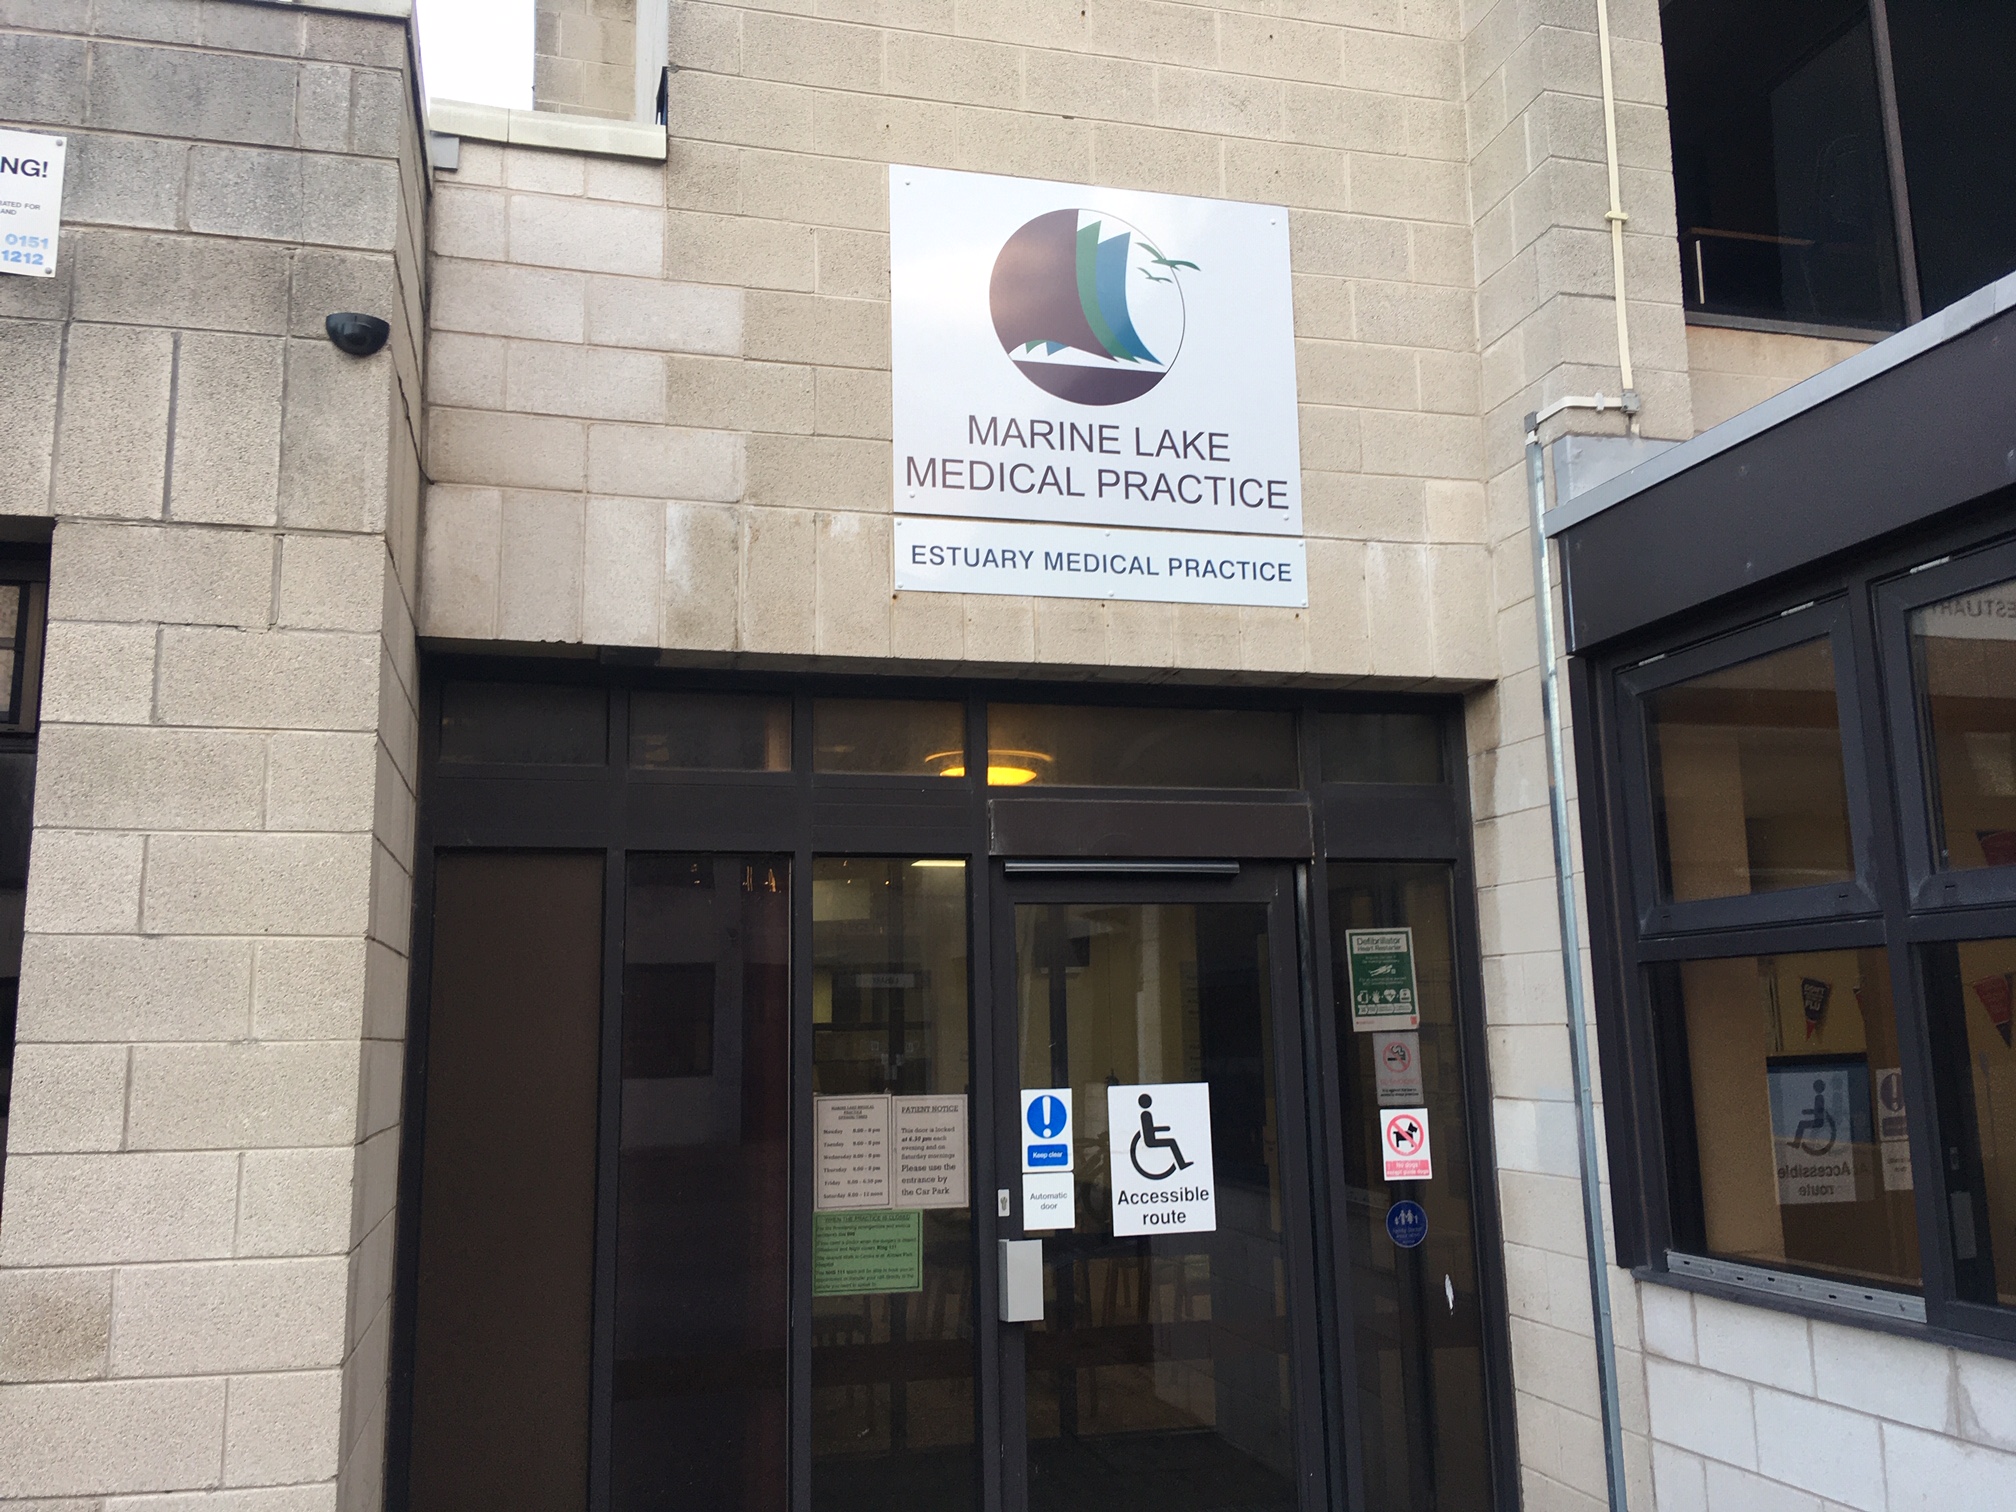 The existing Marine Lake Medical Practice